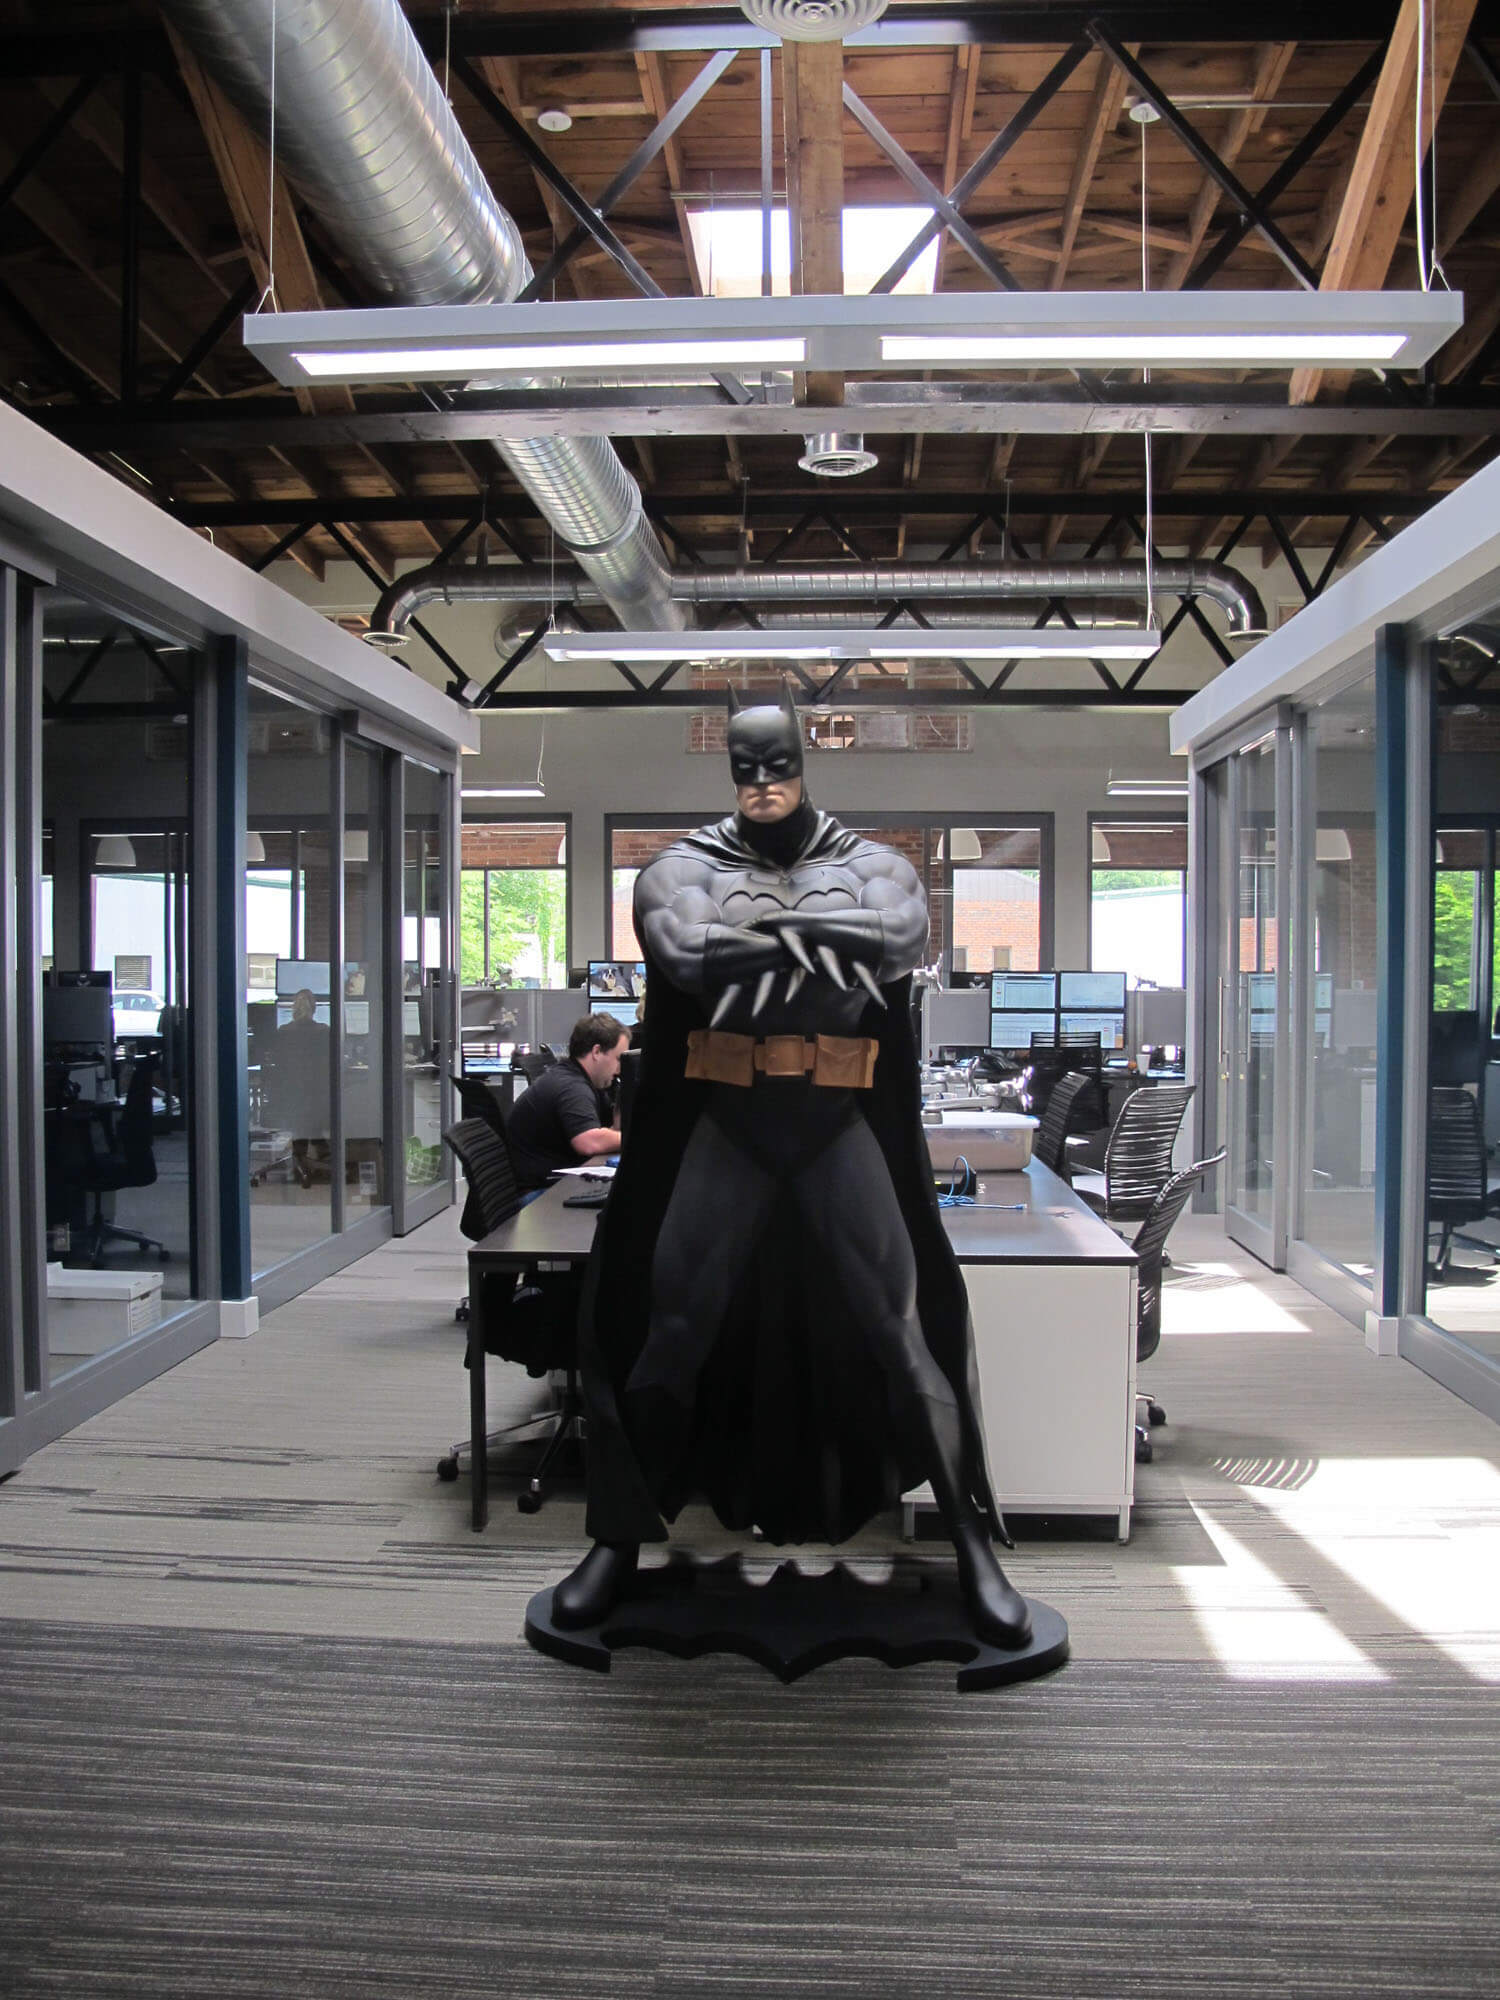 Batman lords over this common work space